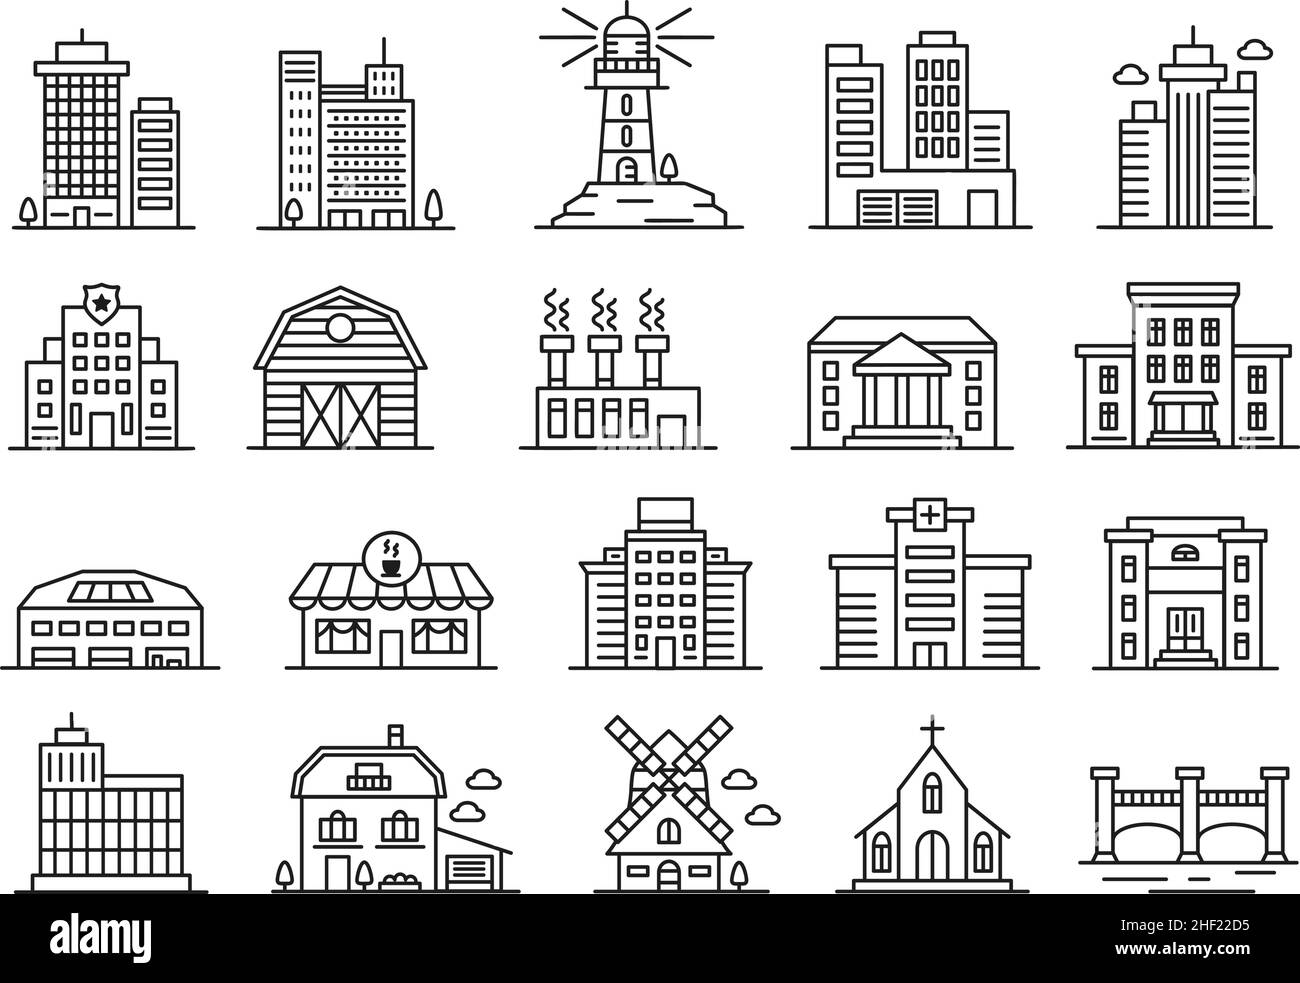 Building line icons, government house, factory, city office buildings. Residential and industrial architecture, urban buildings vector set. Apartments, plants and commercial buildings Stock Vector